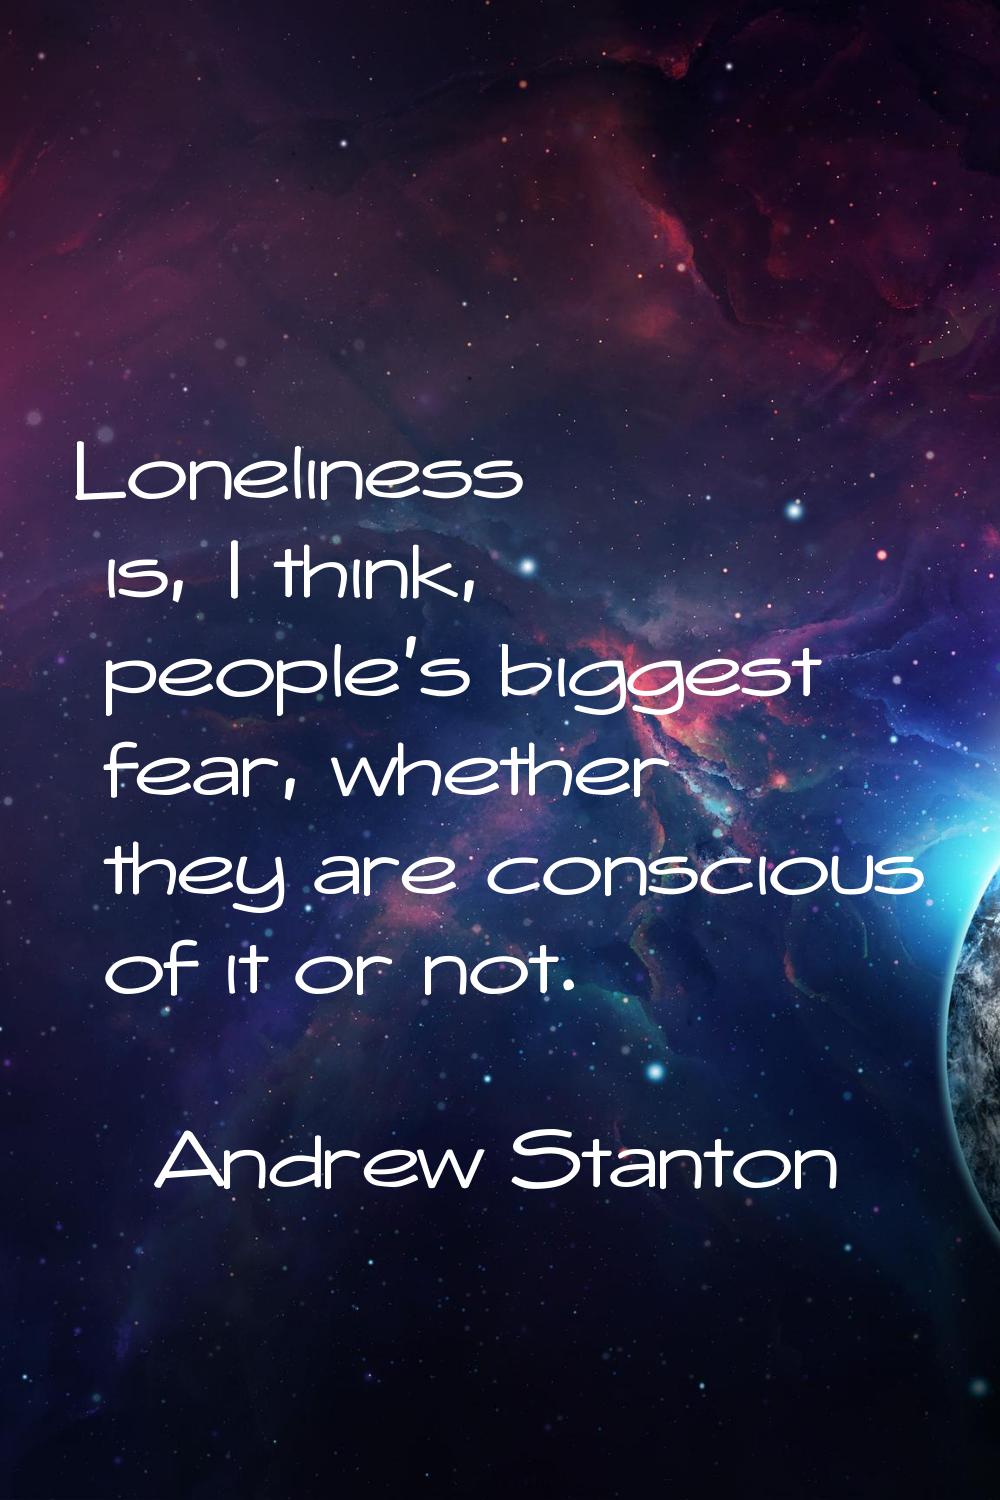 Loneliness is, I think, people's biggest fear, whether they are conscious of it or not.